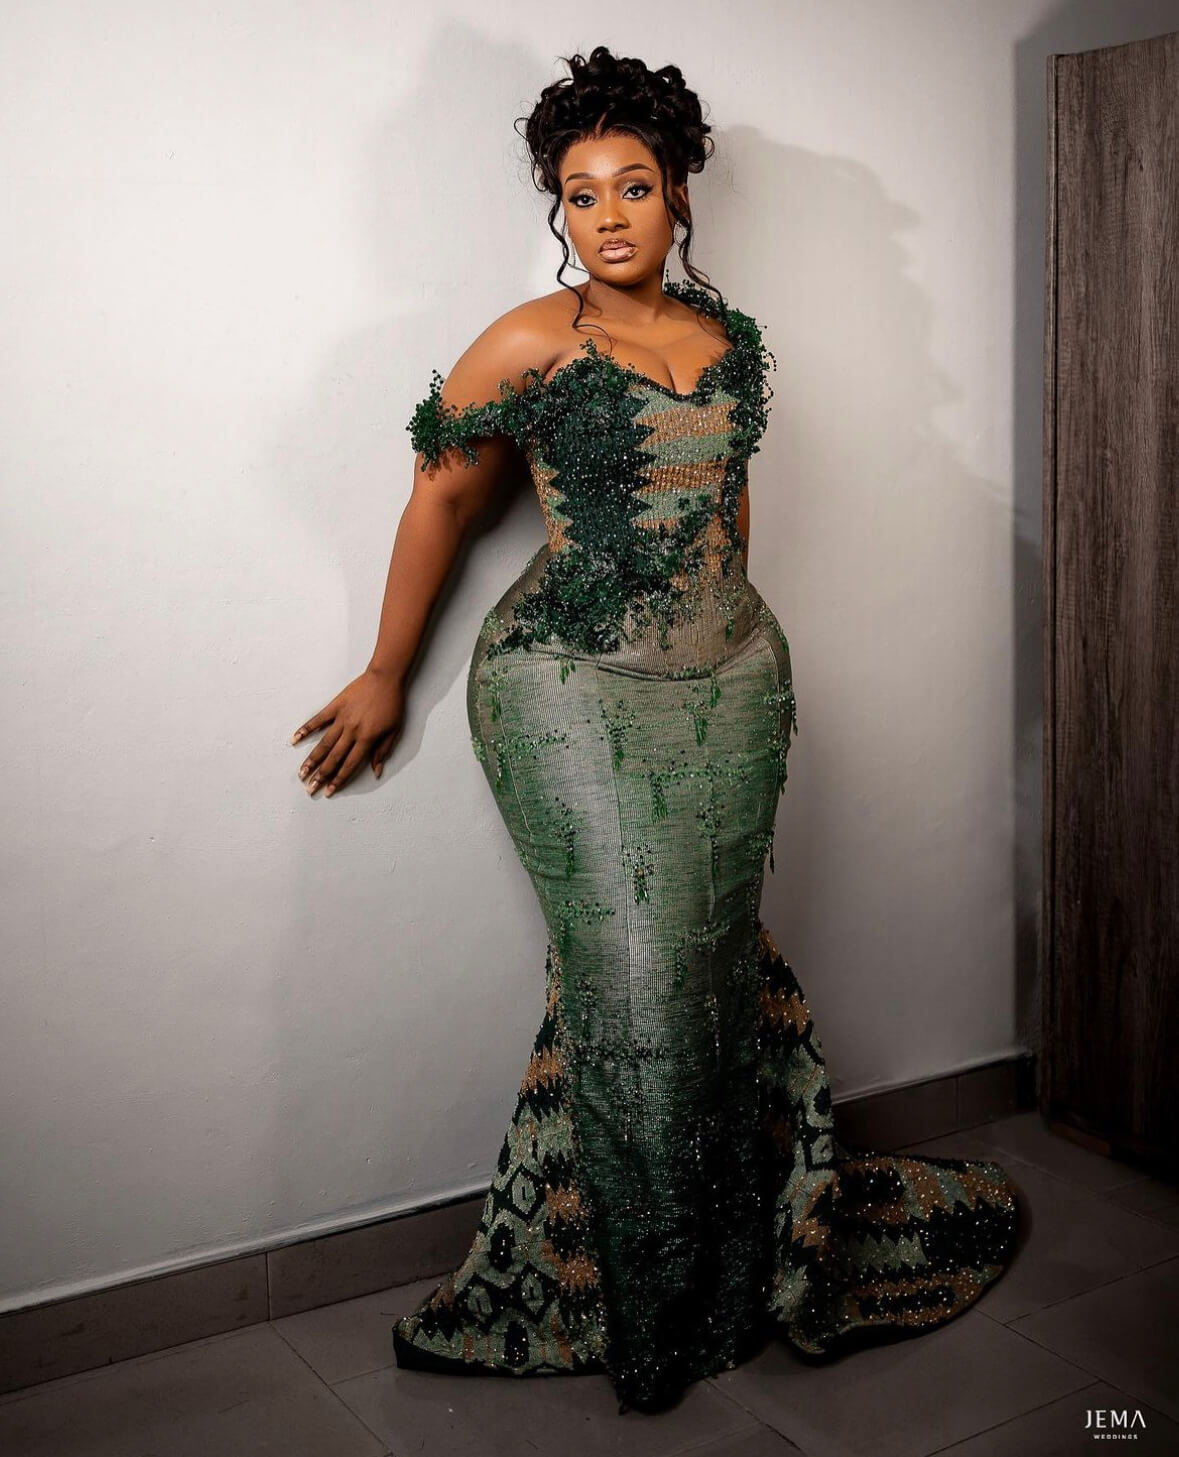 10 traditional wedding dress styles in Ghana to inspire your 2023 looks ...